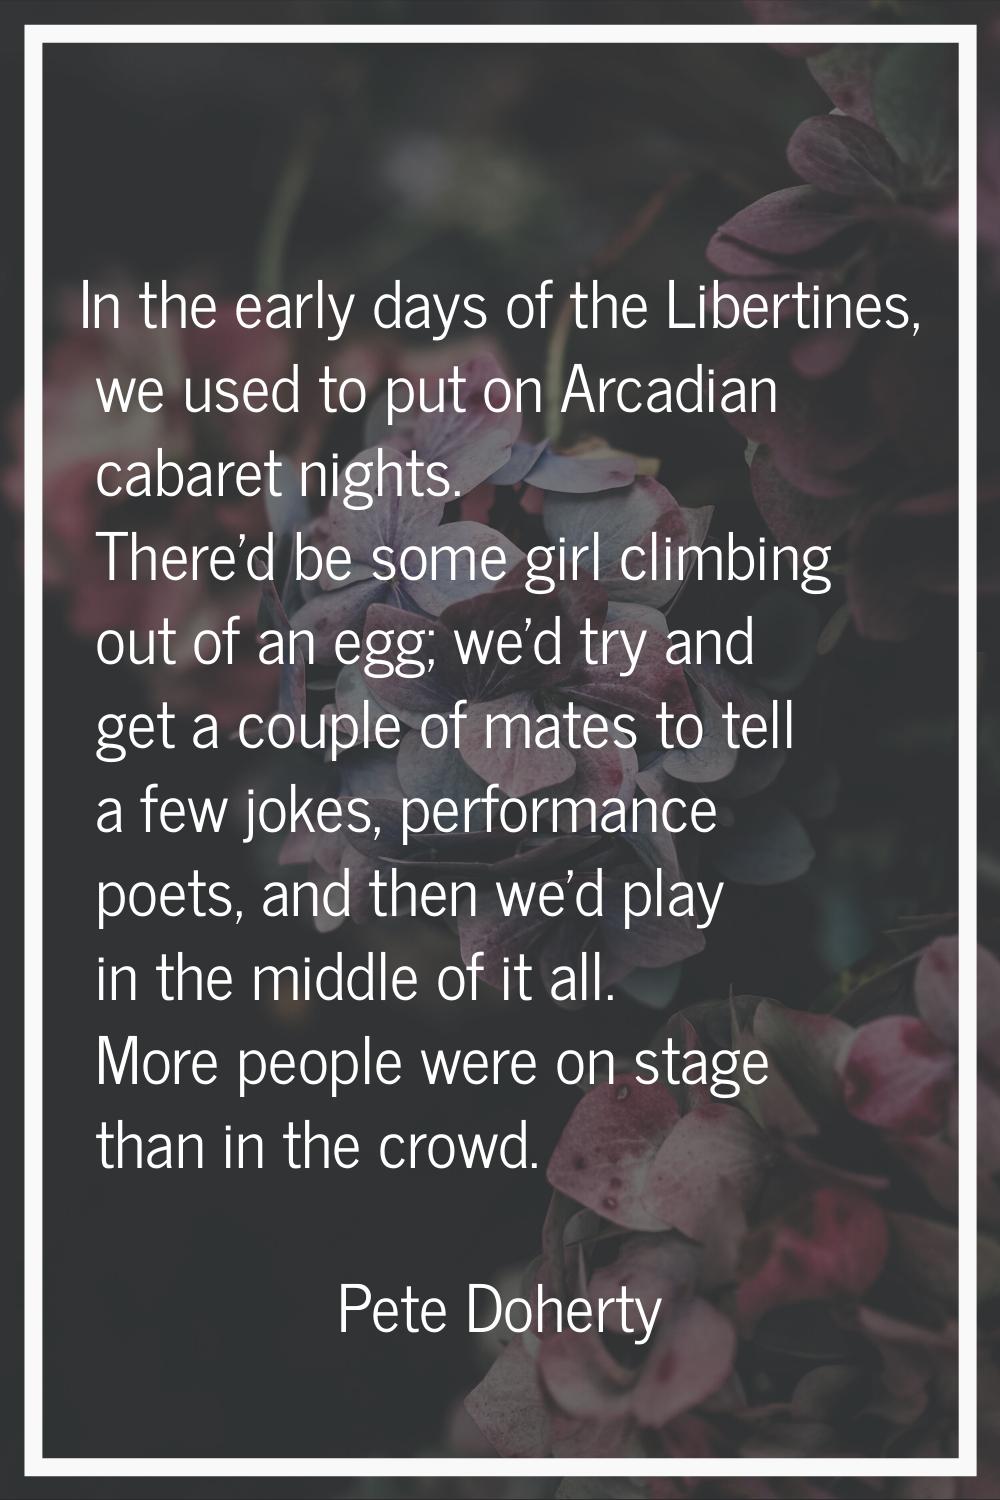 In the early days of the Libertines, we used to put on Arcadian cabaret nights. There'd be some gir